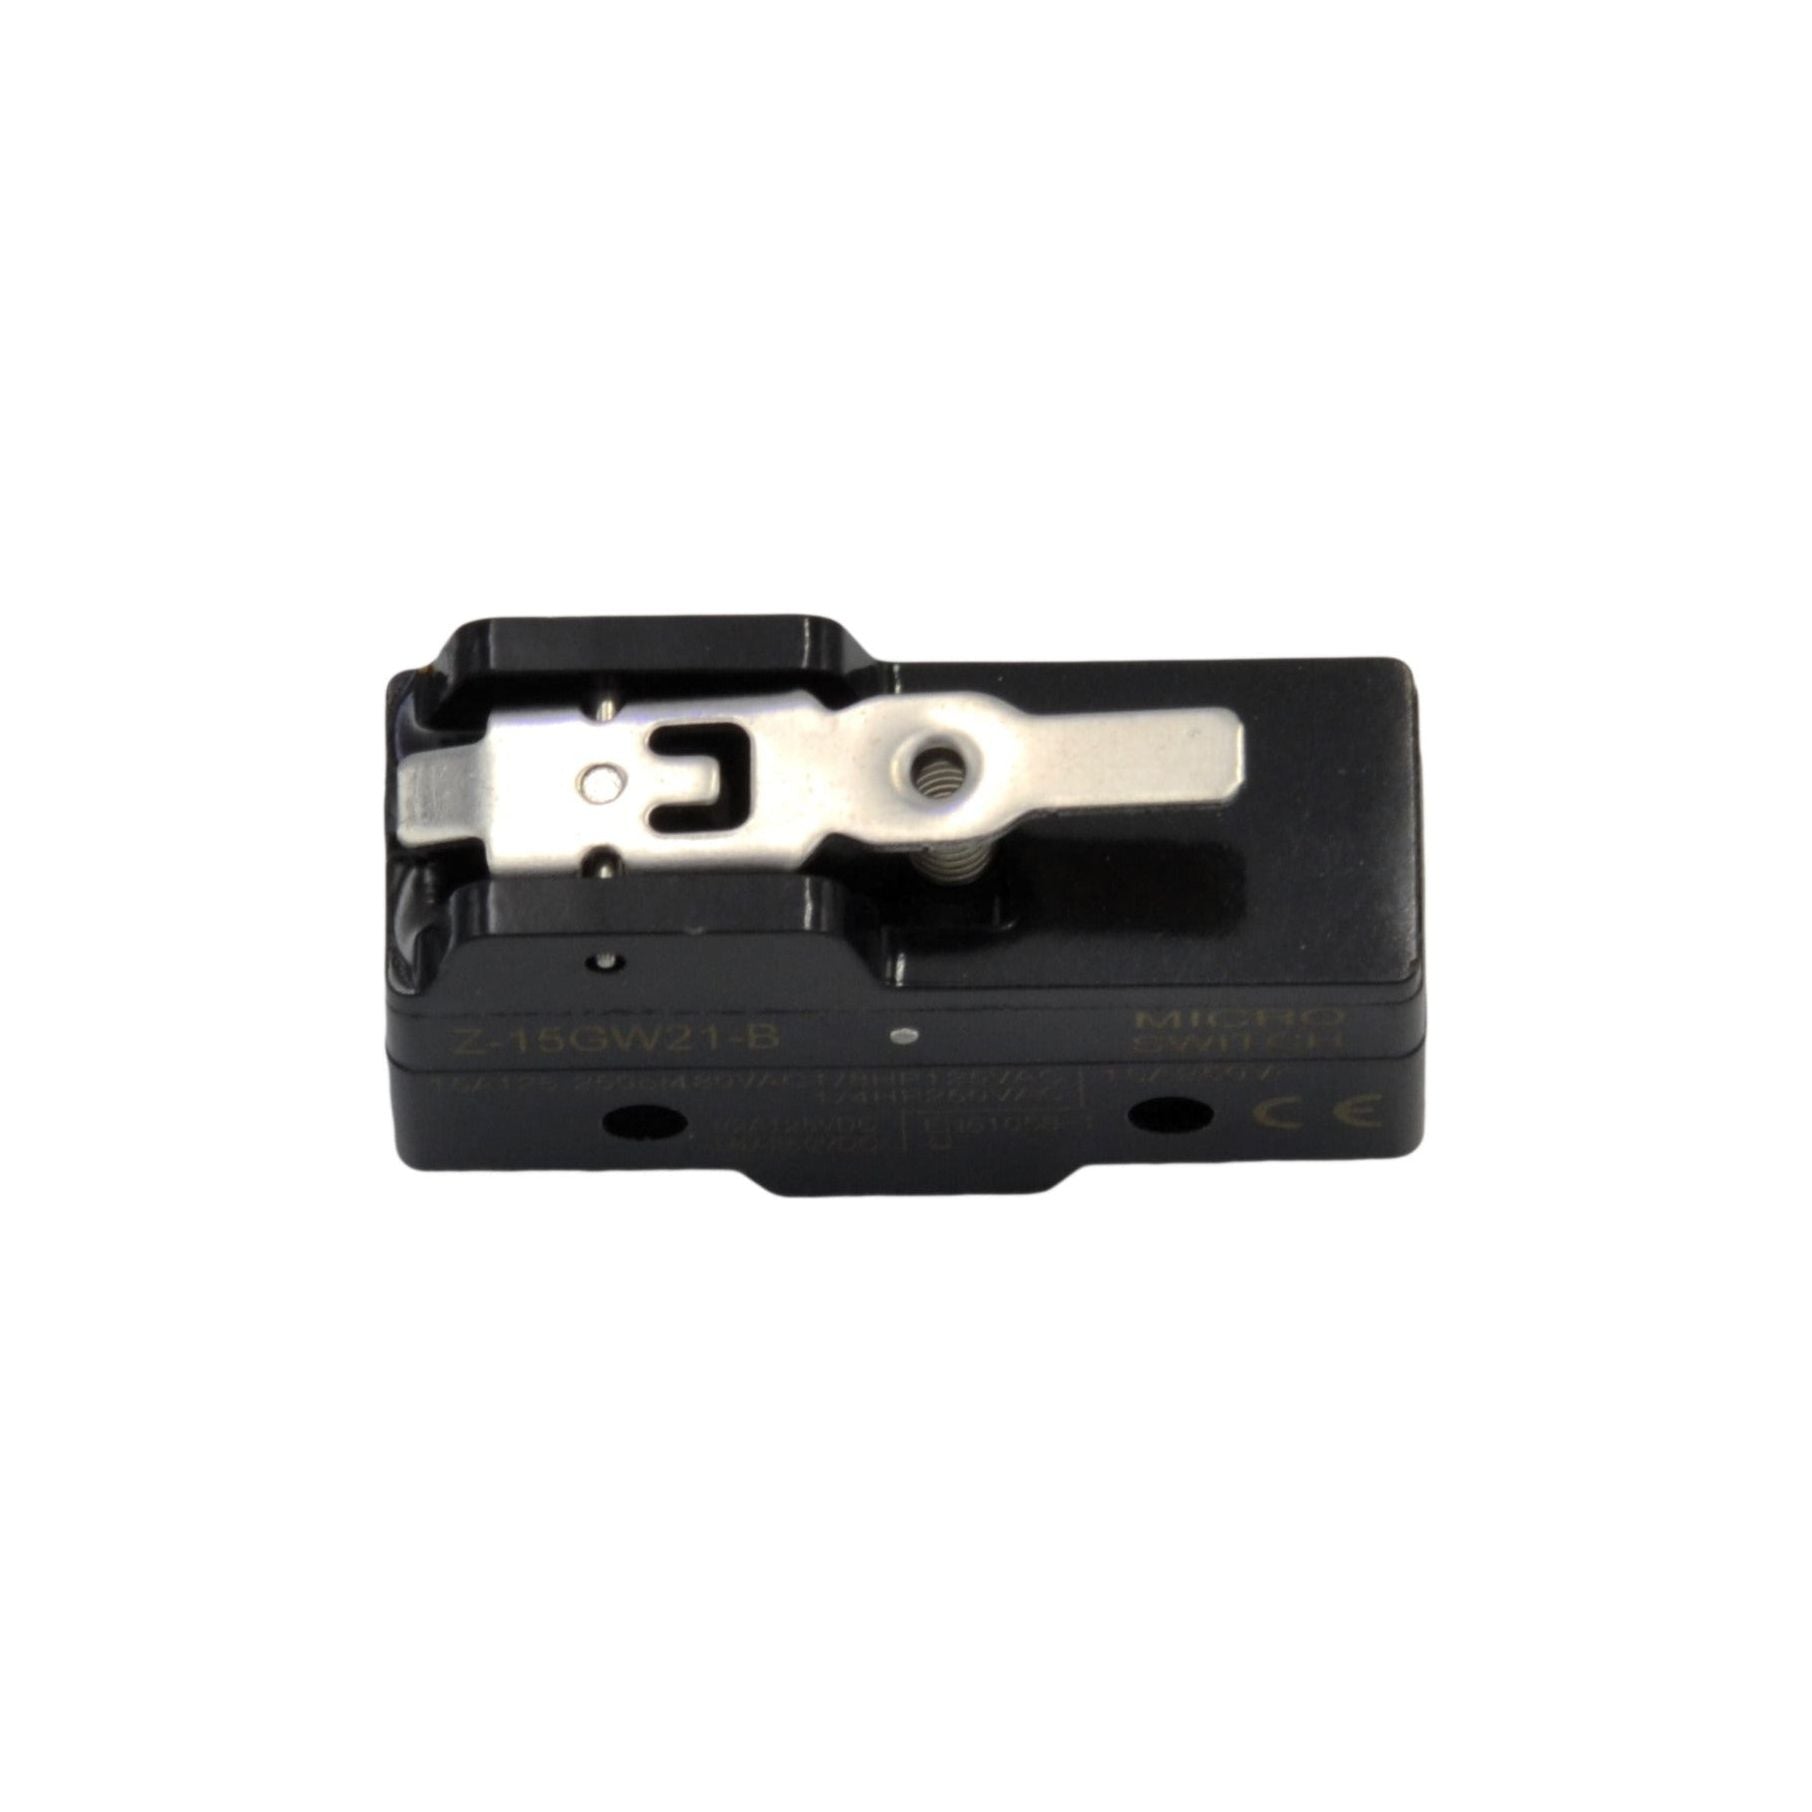 Z-15GW21-B Short Hinge, Stainless Steel Lever Micro Limit Switch